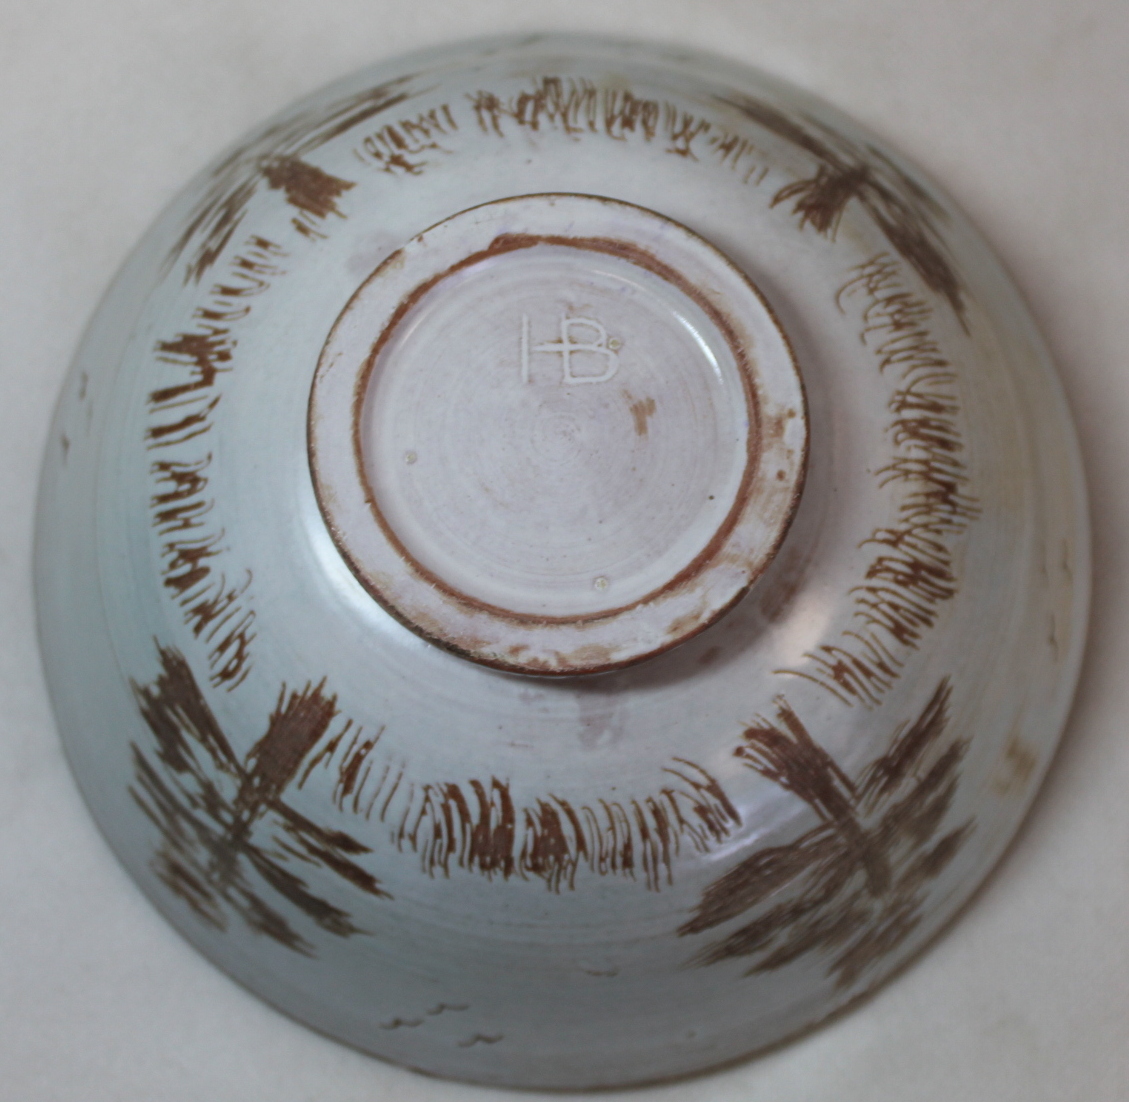 Two studio pottery small circular bowls, both with sgraffito decoration of trees, one with duck - Image 4 of 9